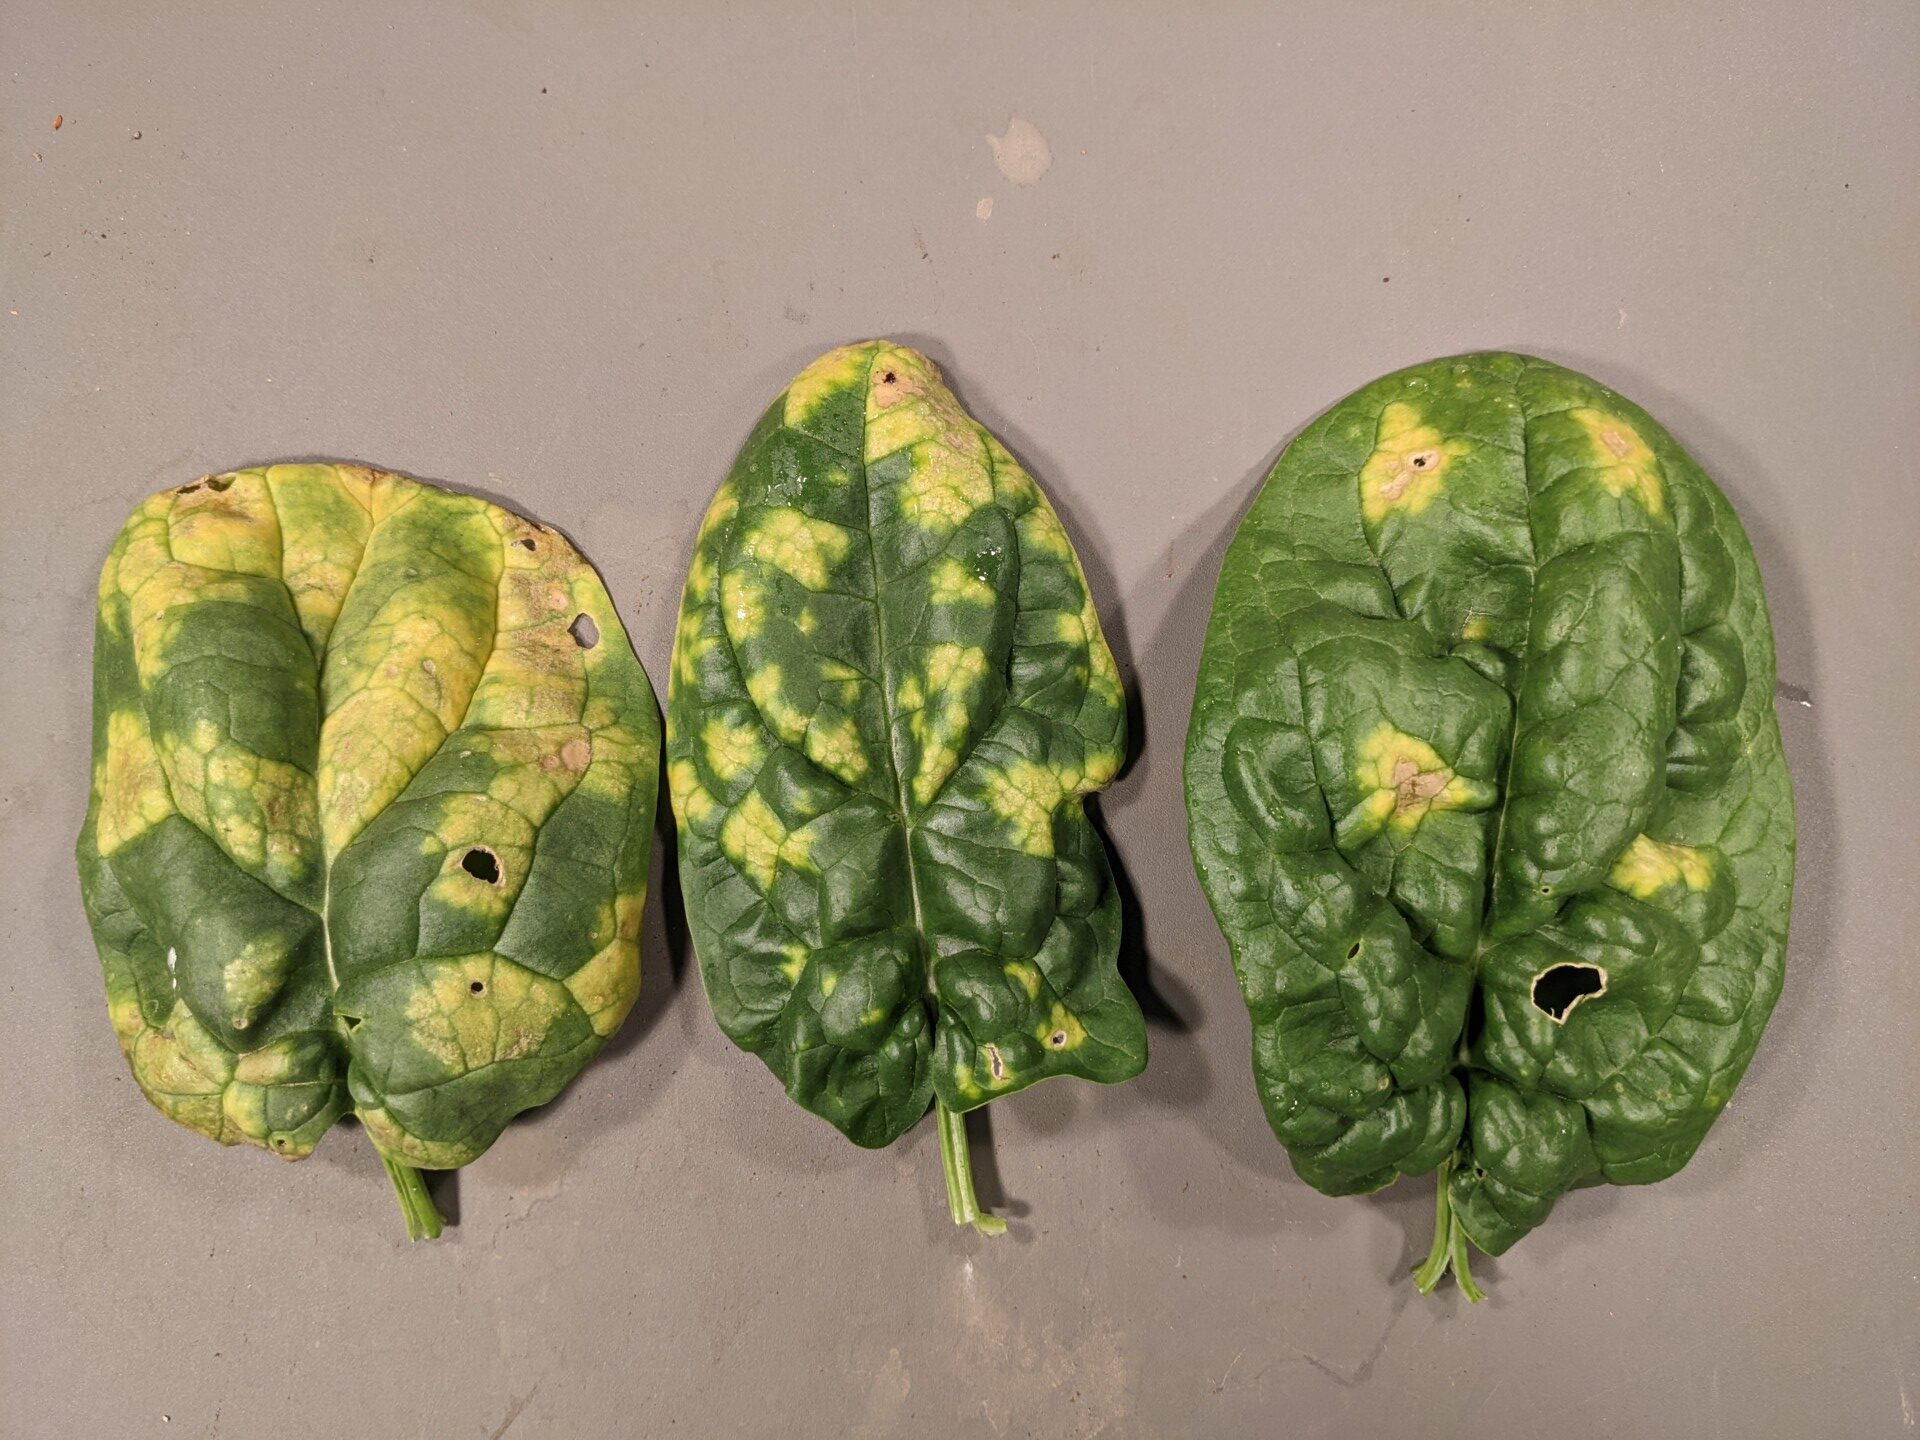 Downy mildew of spinach.